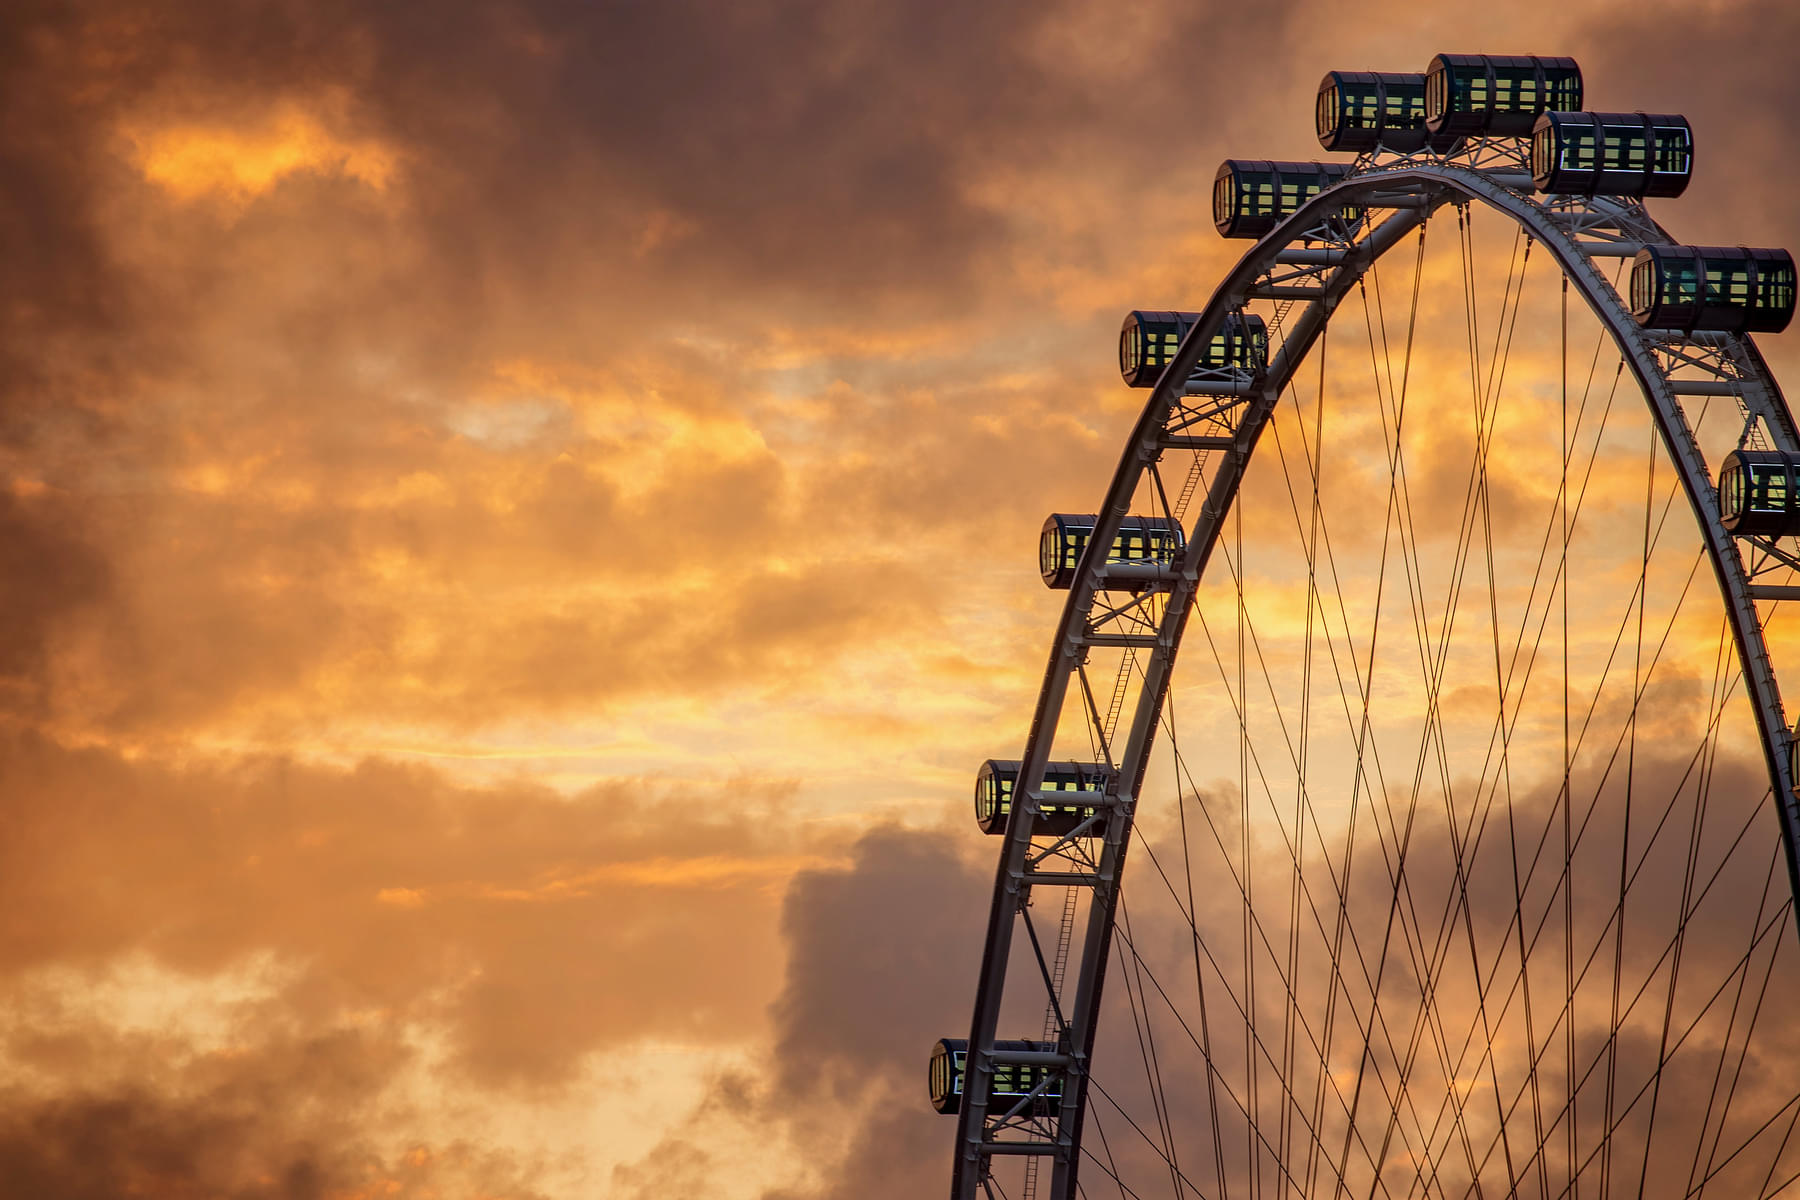 Buy singapore flyer ticket online and have a fun-filled family experience